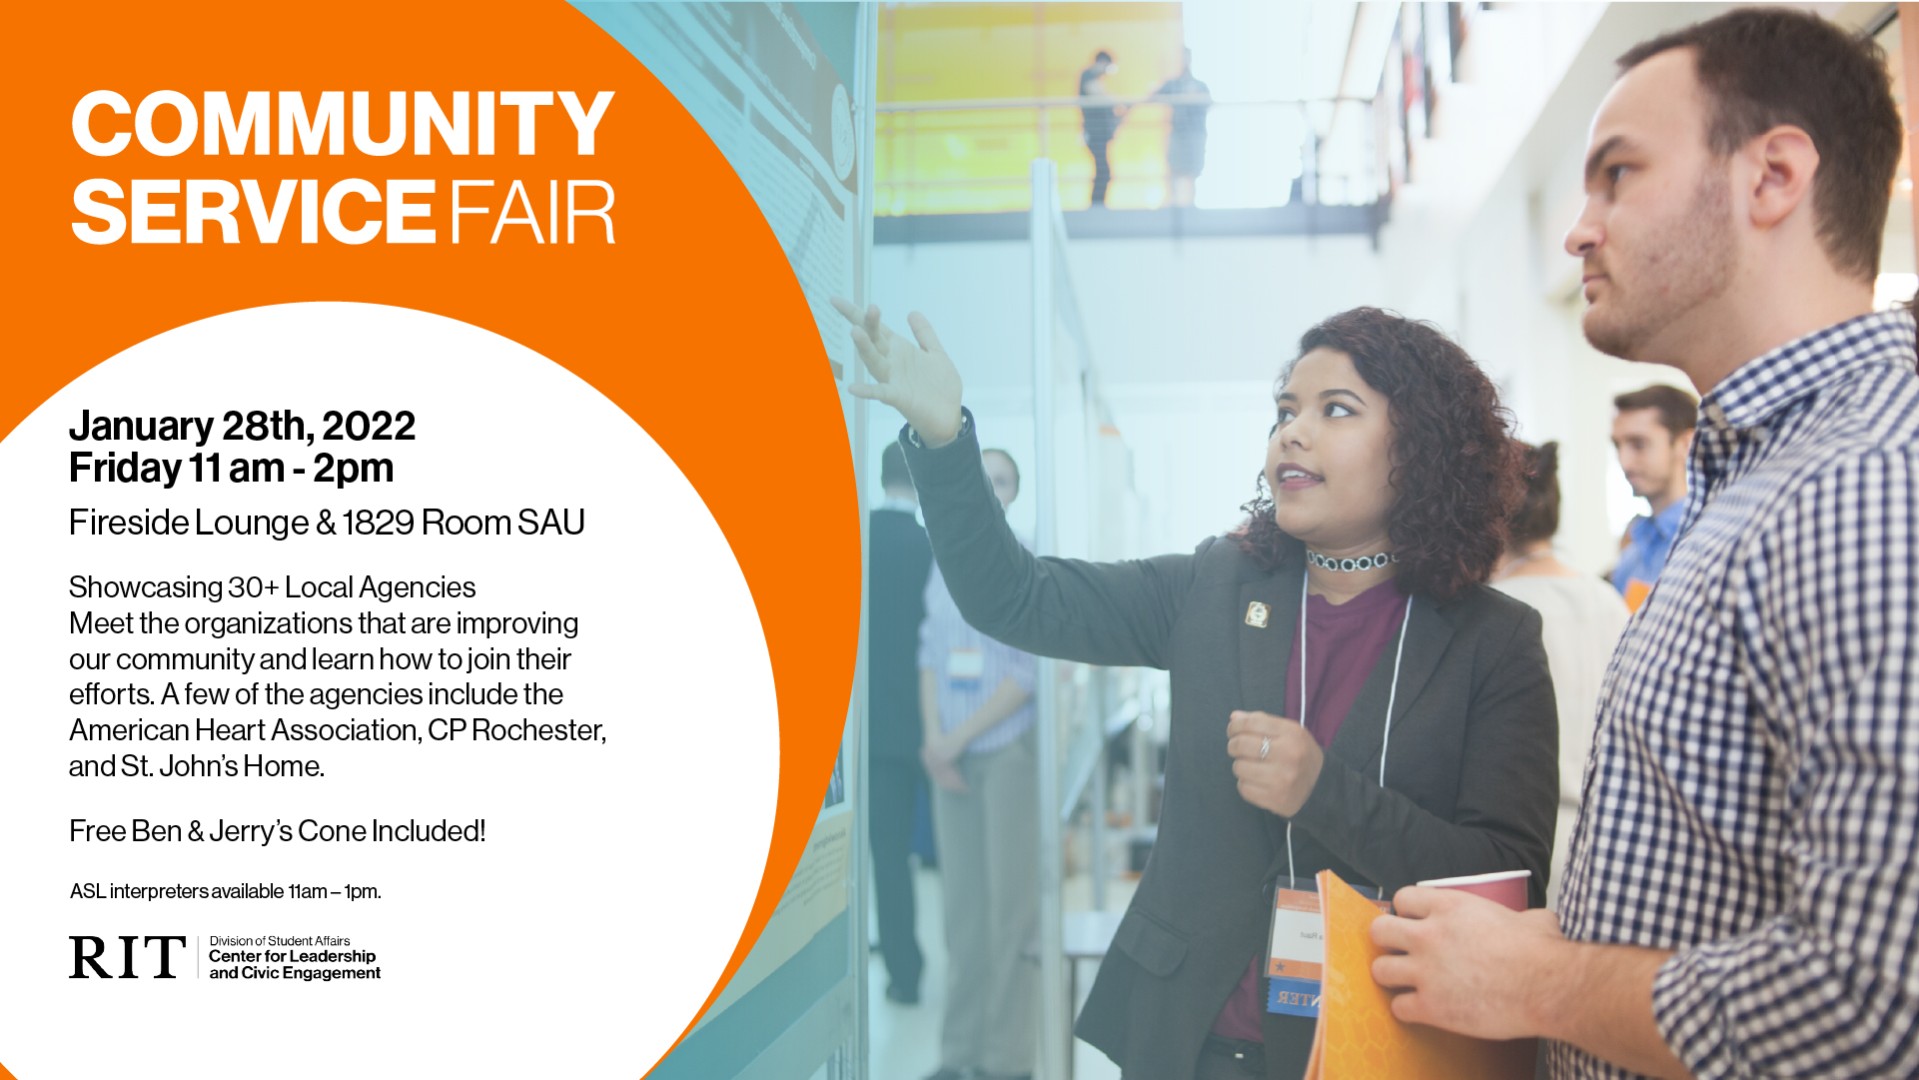 On the right side of the image, a woman and a man are engaged in conversation with each other, as the woman points to an object off screen. To the left of the image, a white circle containing the event details sits inside of a larger orange circle, which contains the name of the event "Community Service Fair".